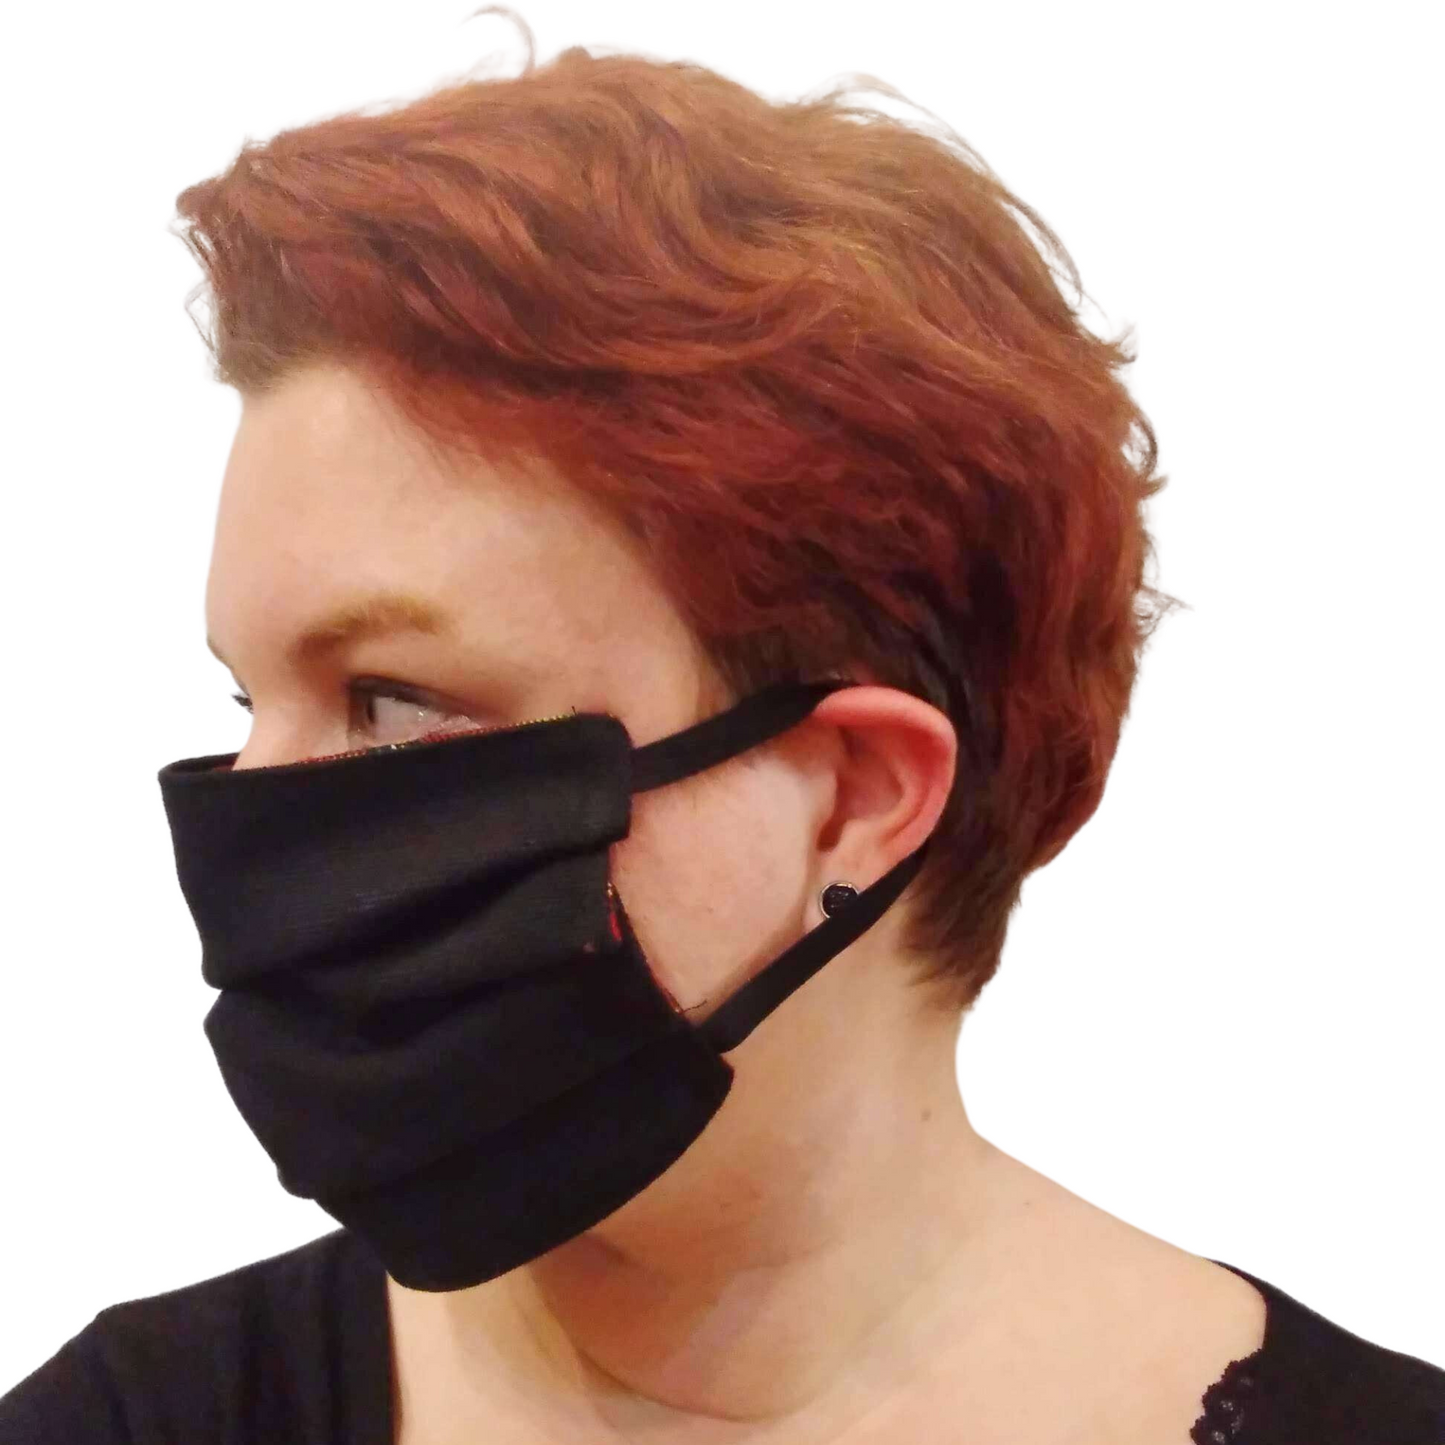 Face Mask - Reversible Red Plaid and Black Canvas